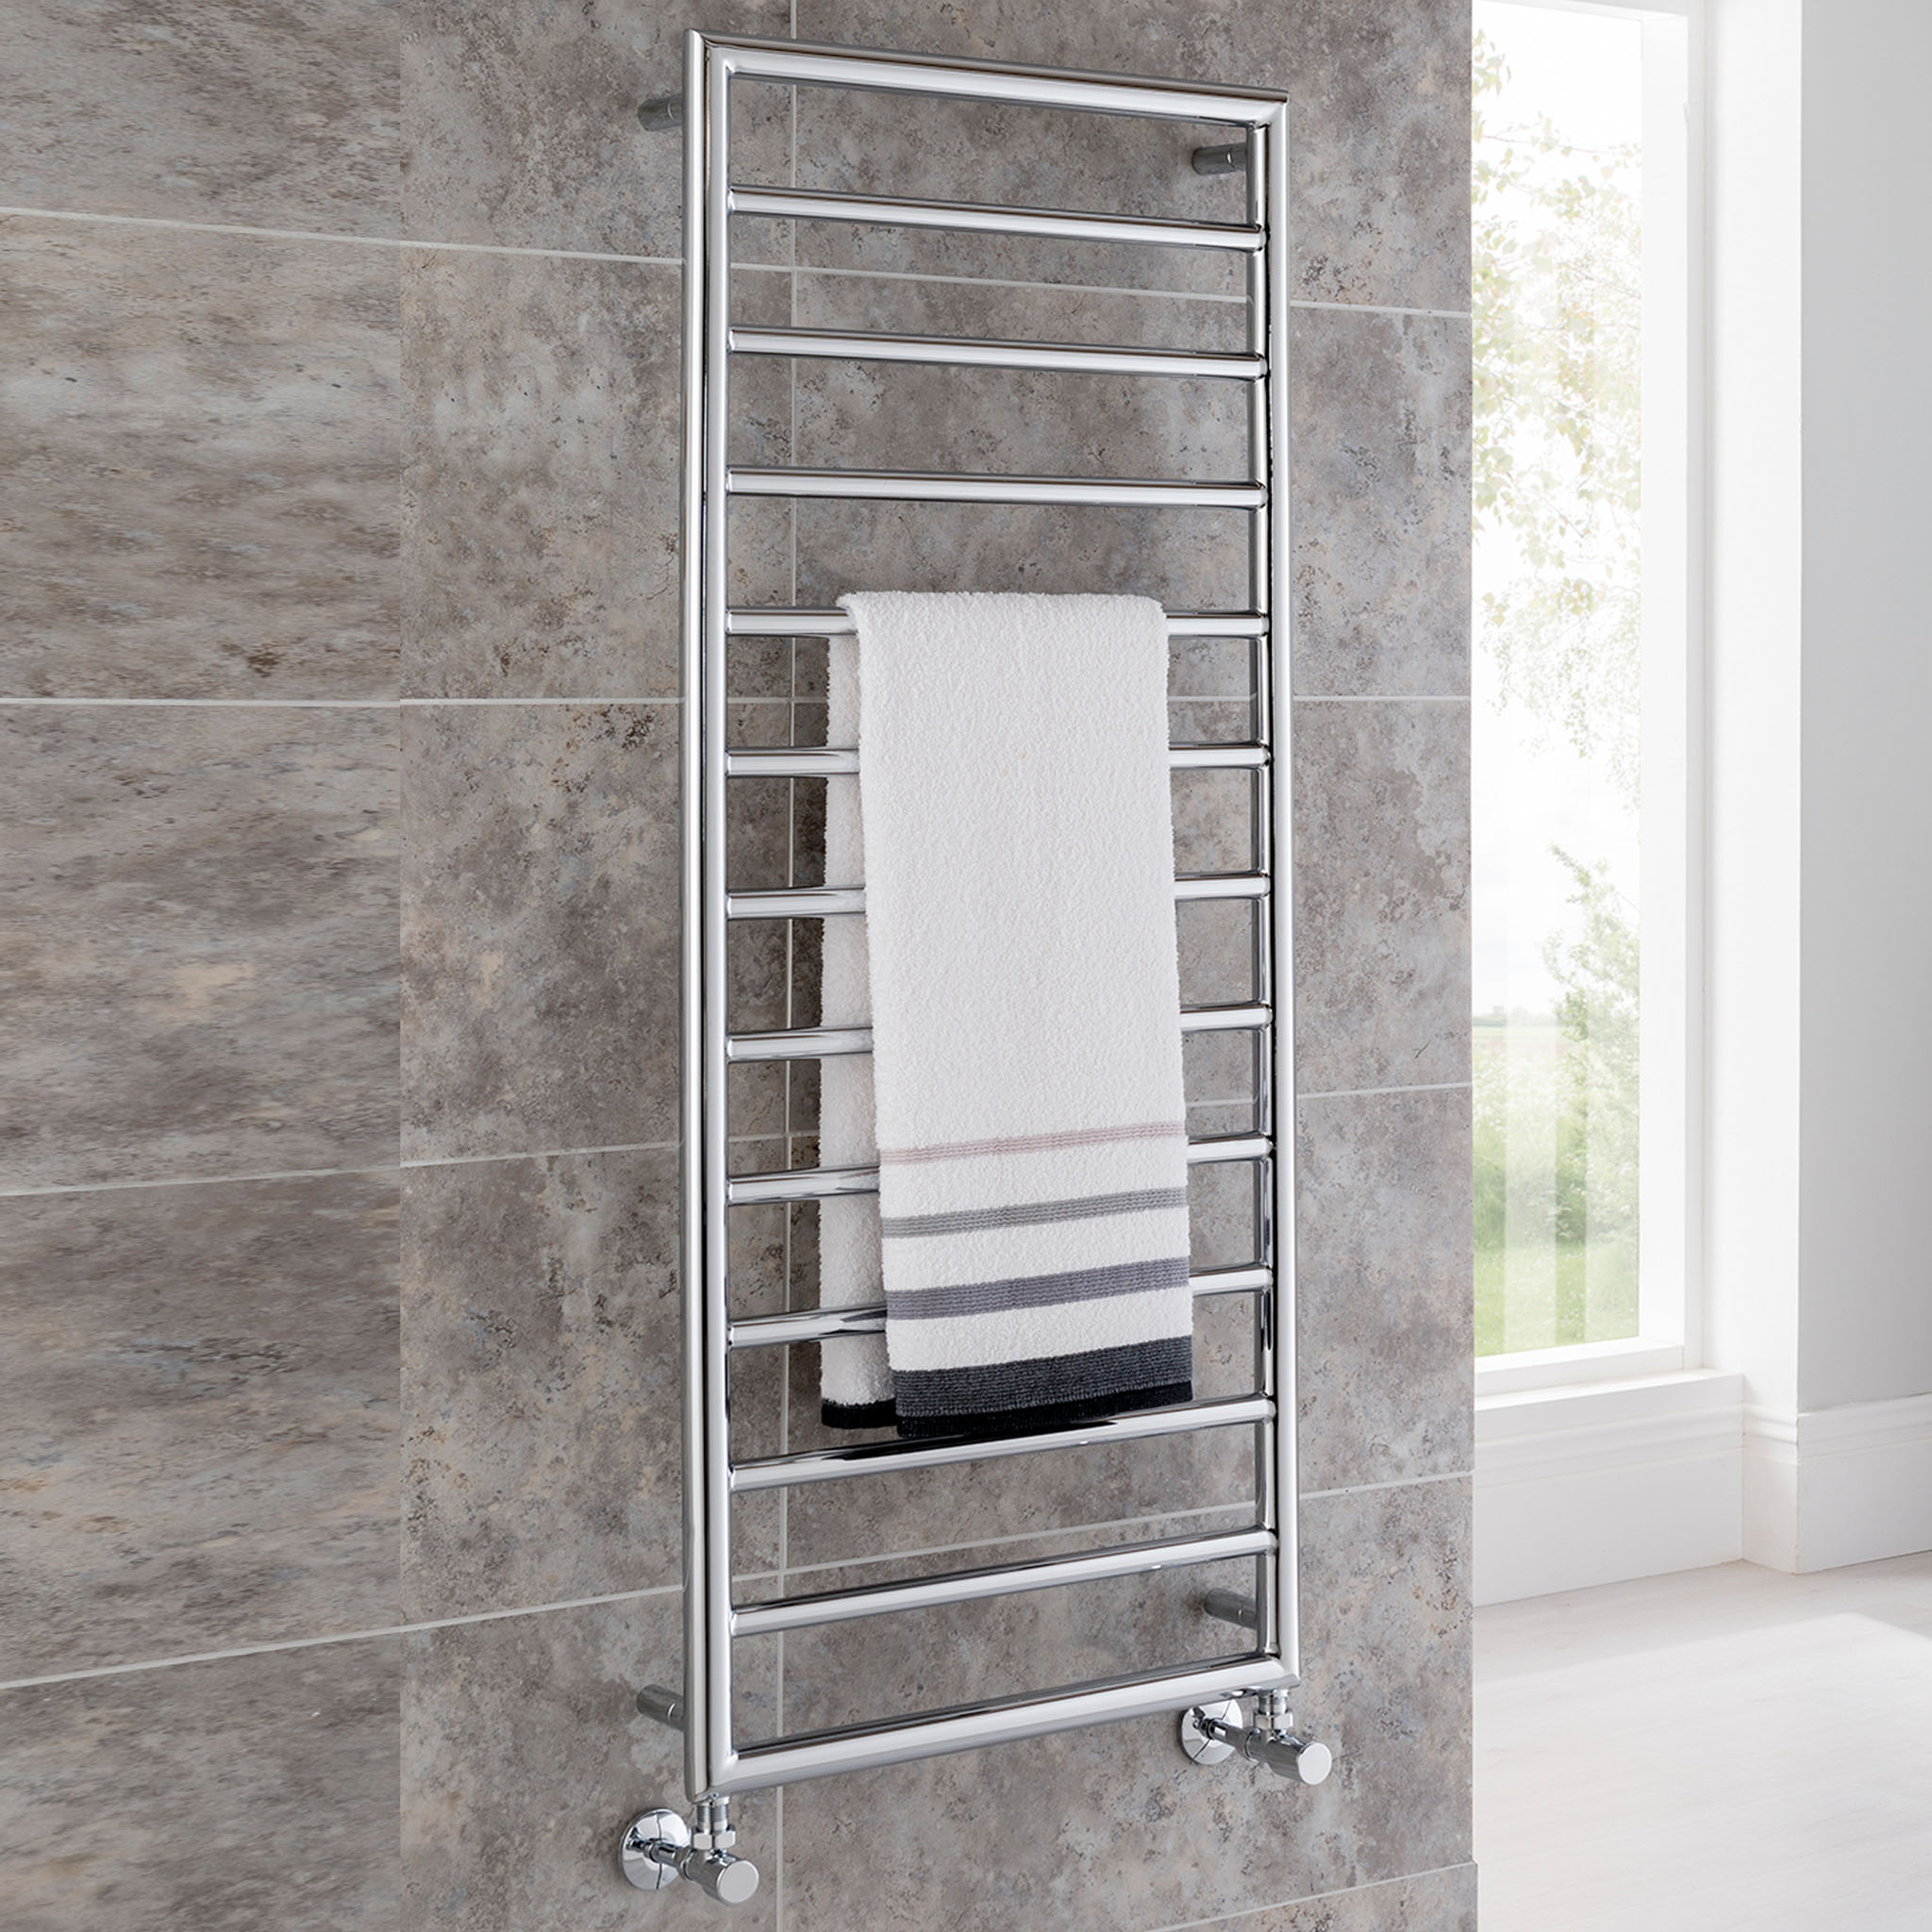 Vogue Smooth Wall Mounted Heated Towel Rail